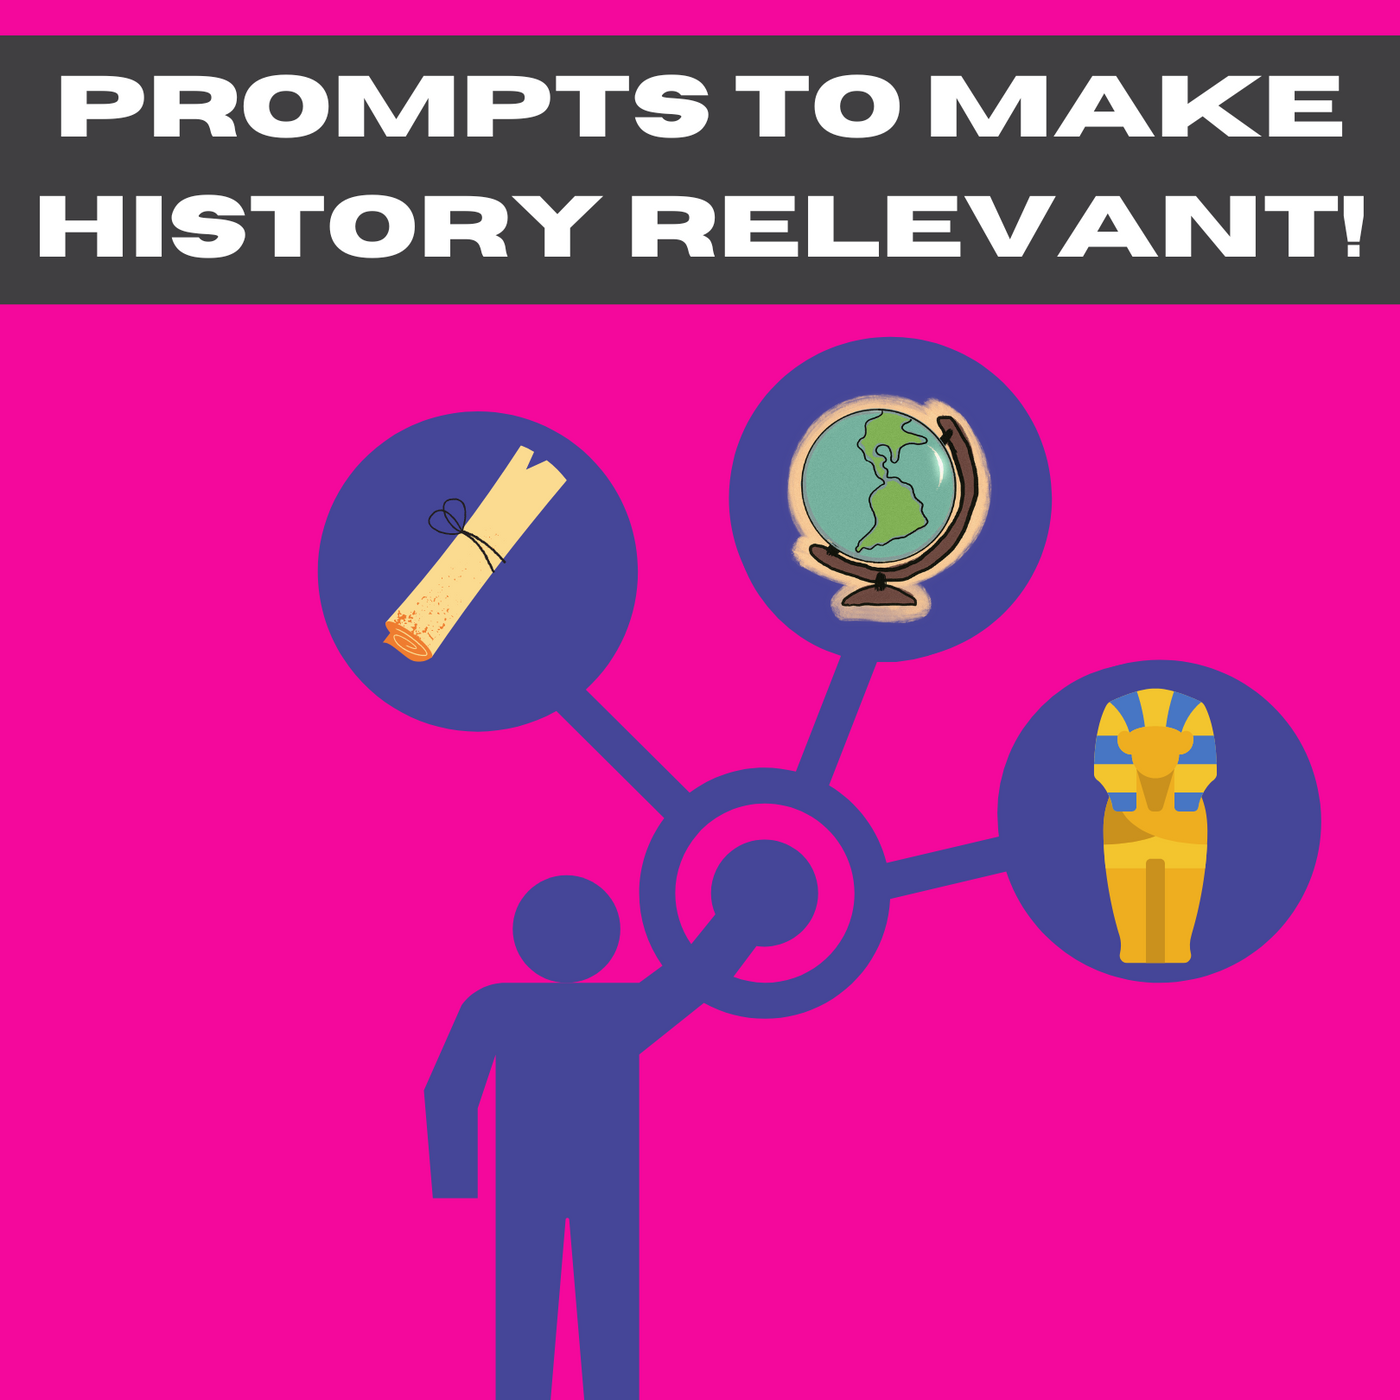 Simple Prompts to Make History Relevant!